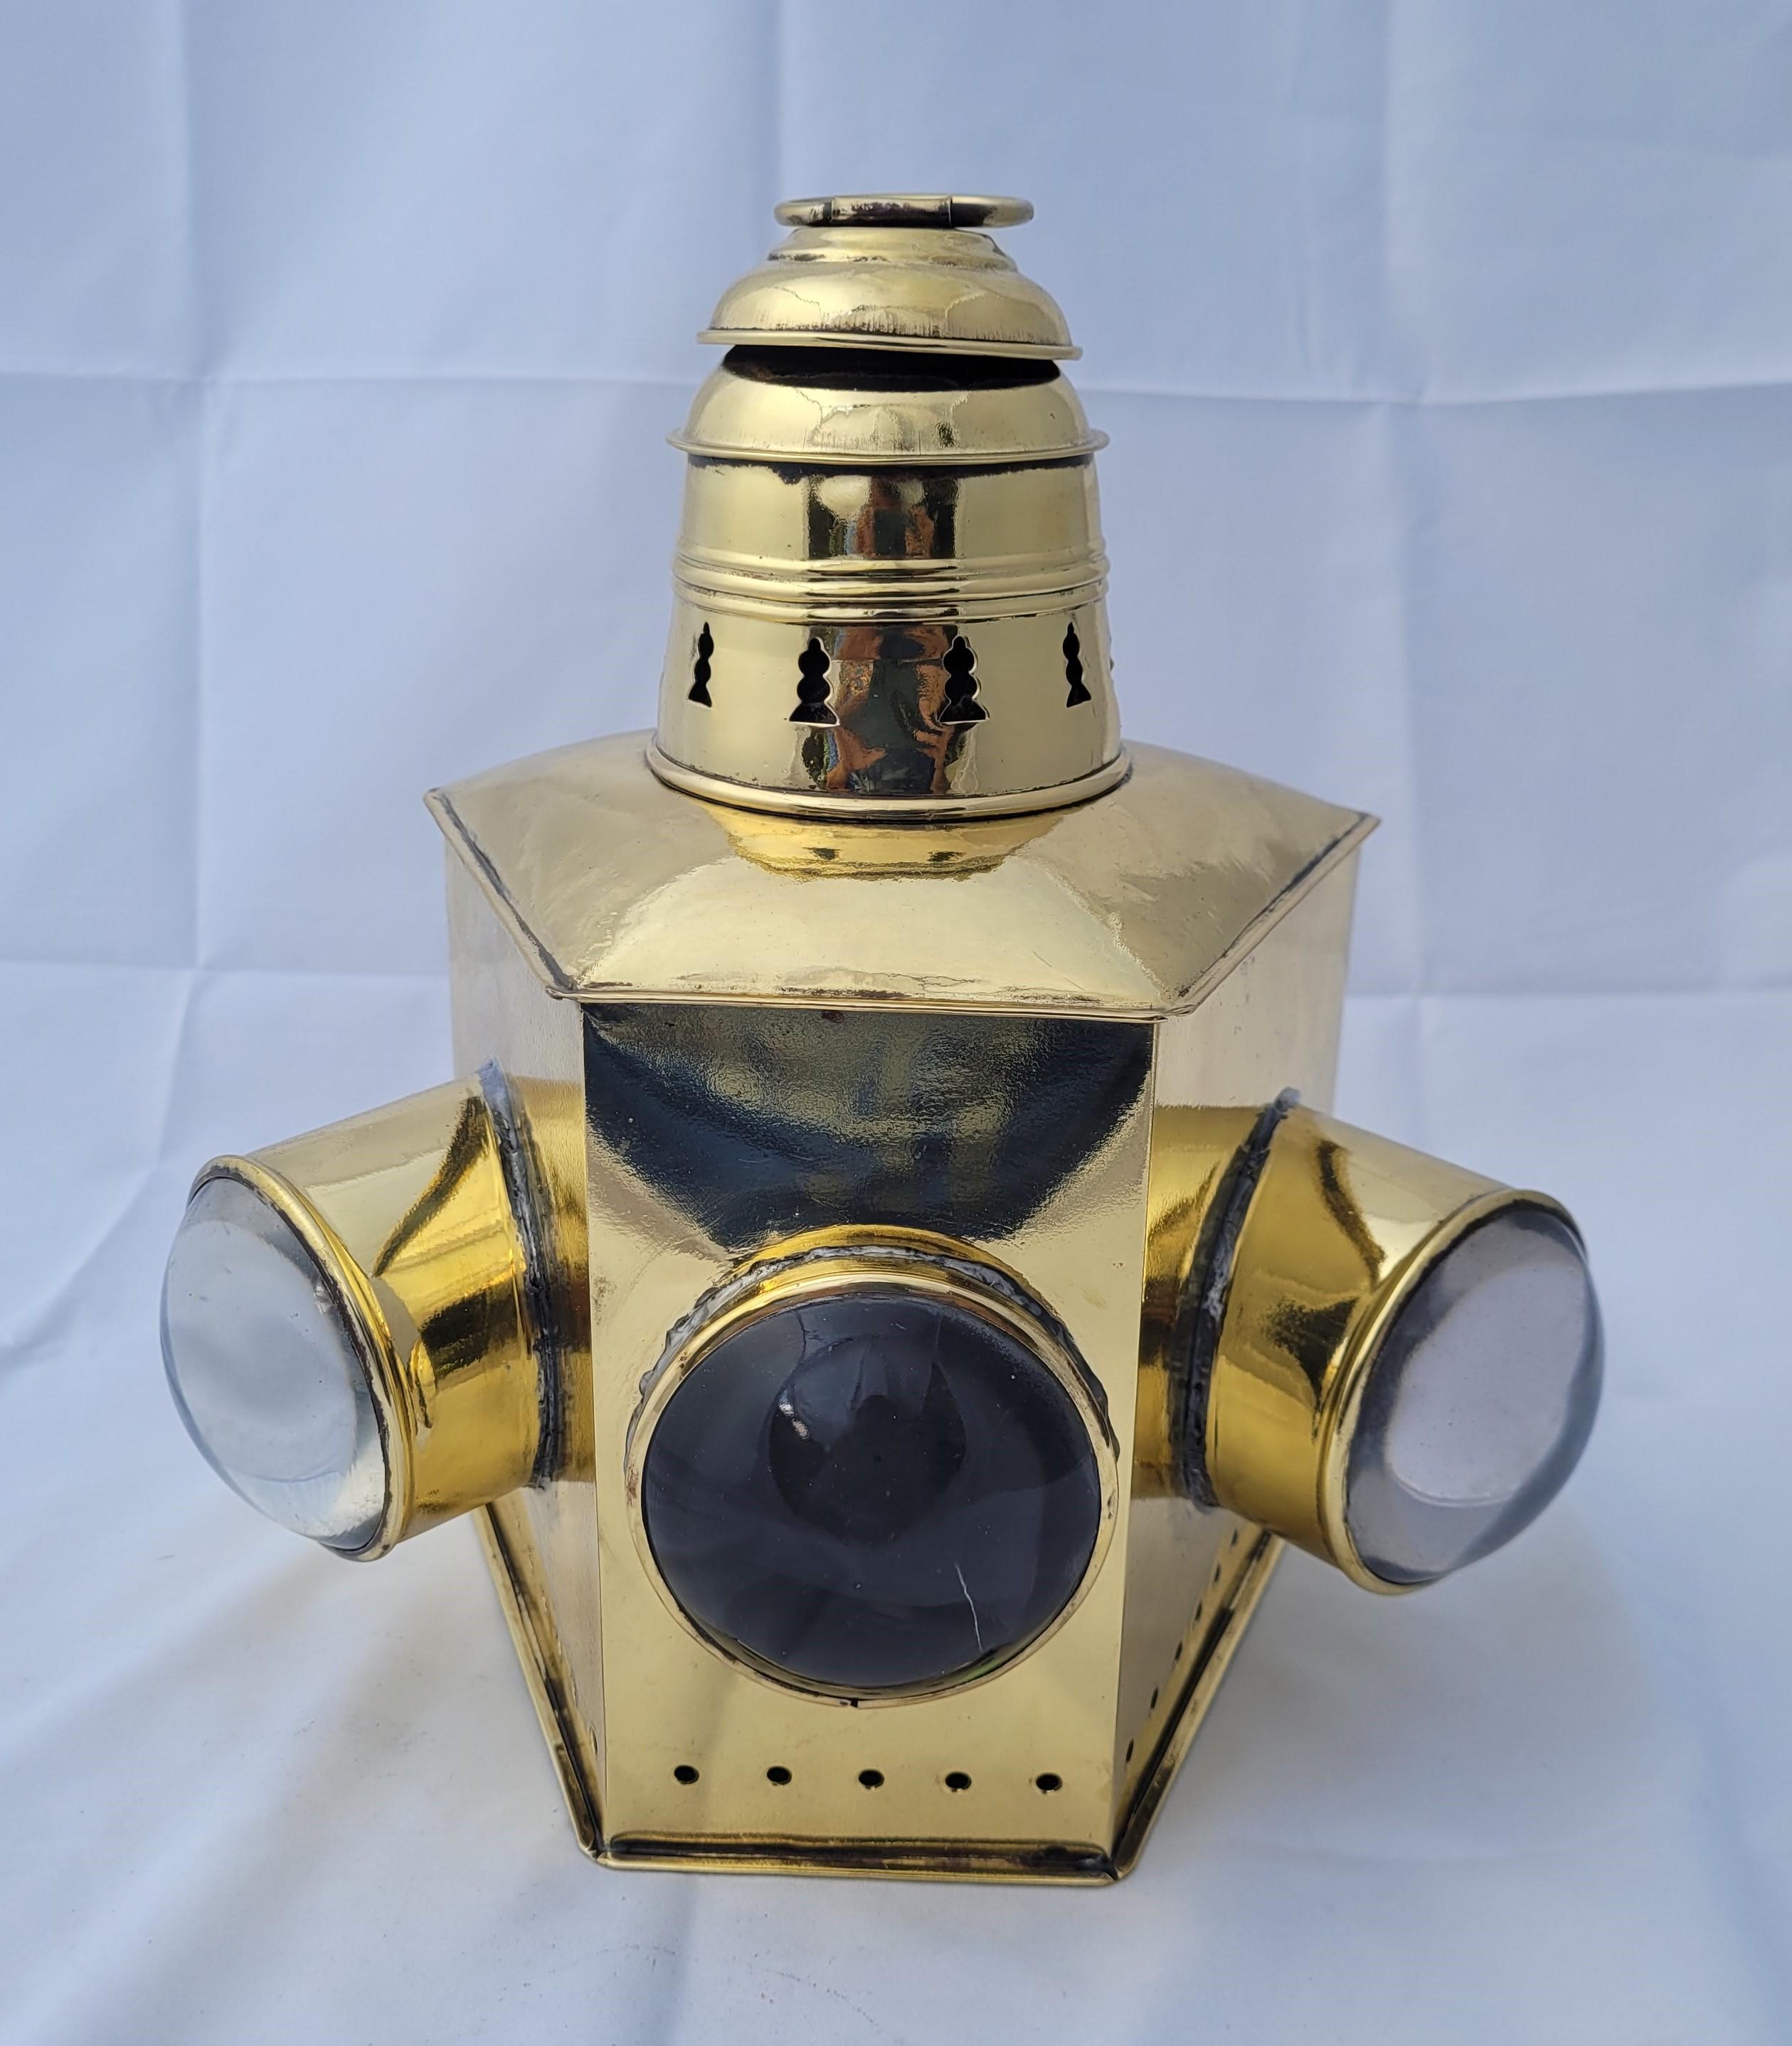 Exceptional Yacht lantern with large red, blue, and clear bullseye lenses. Highly polished and lacquered case. Vented top and carry rings. Hinged door to rear. Oil burner in place. This is the largest of the design that we have ever seen. Quite